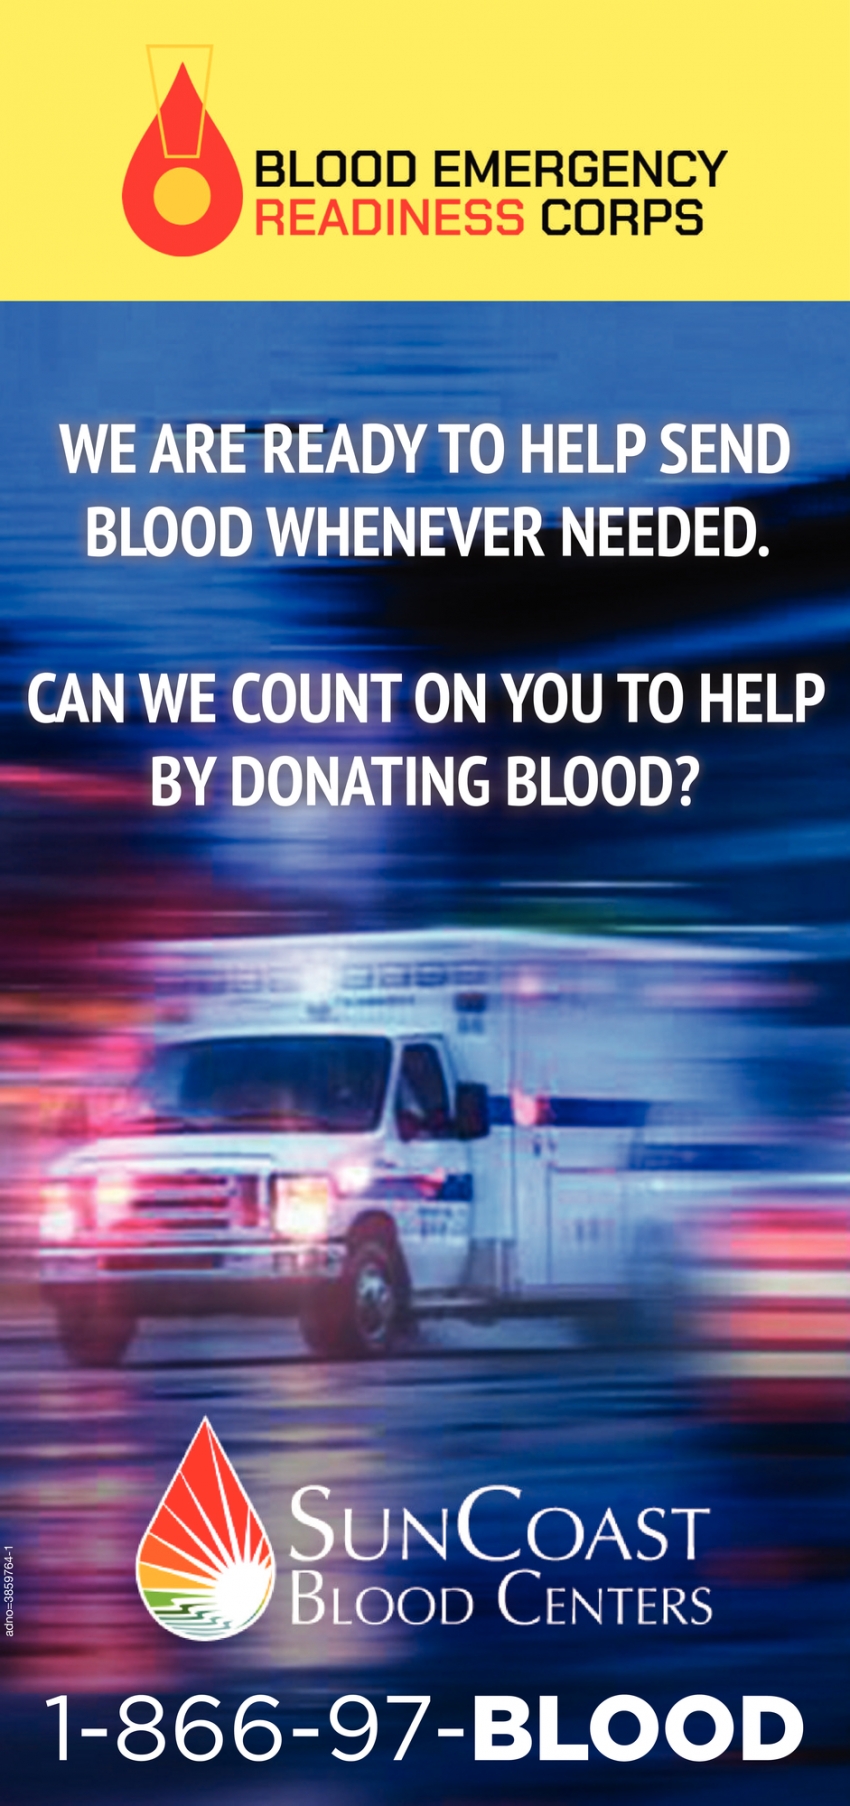 Blood Emergency Readiness Corps